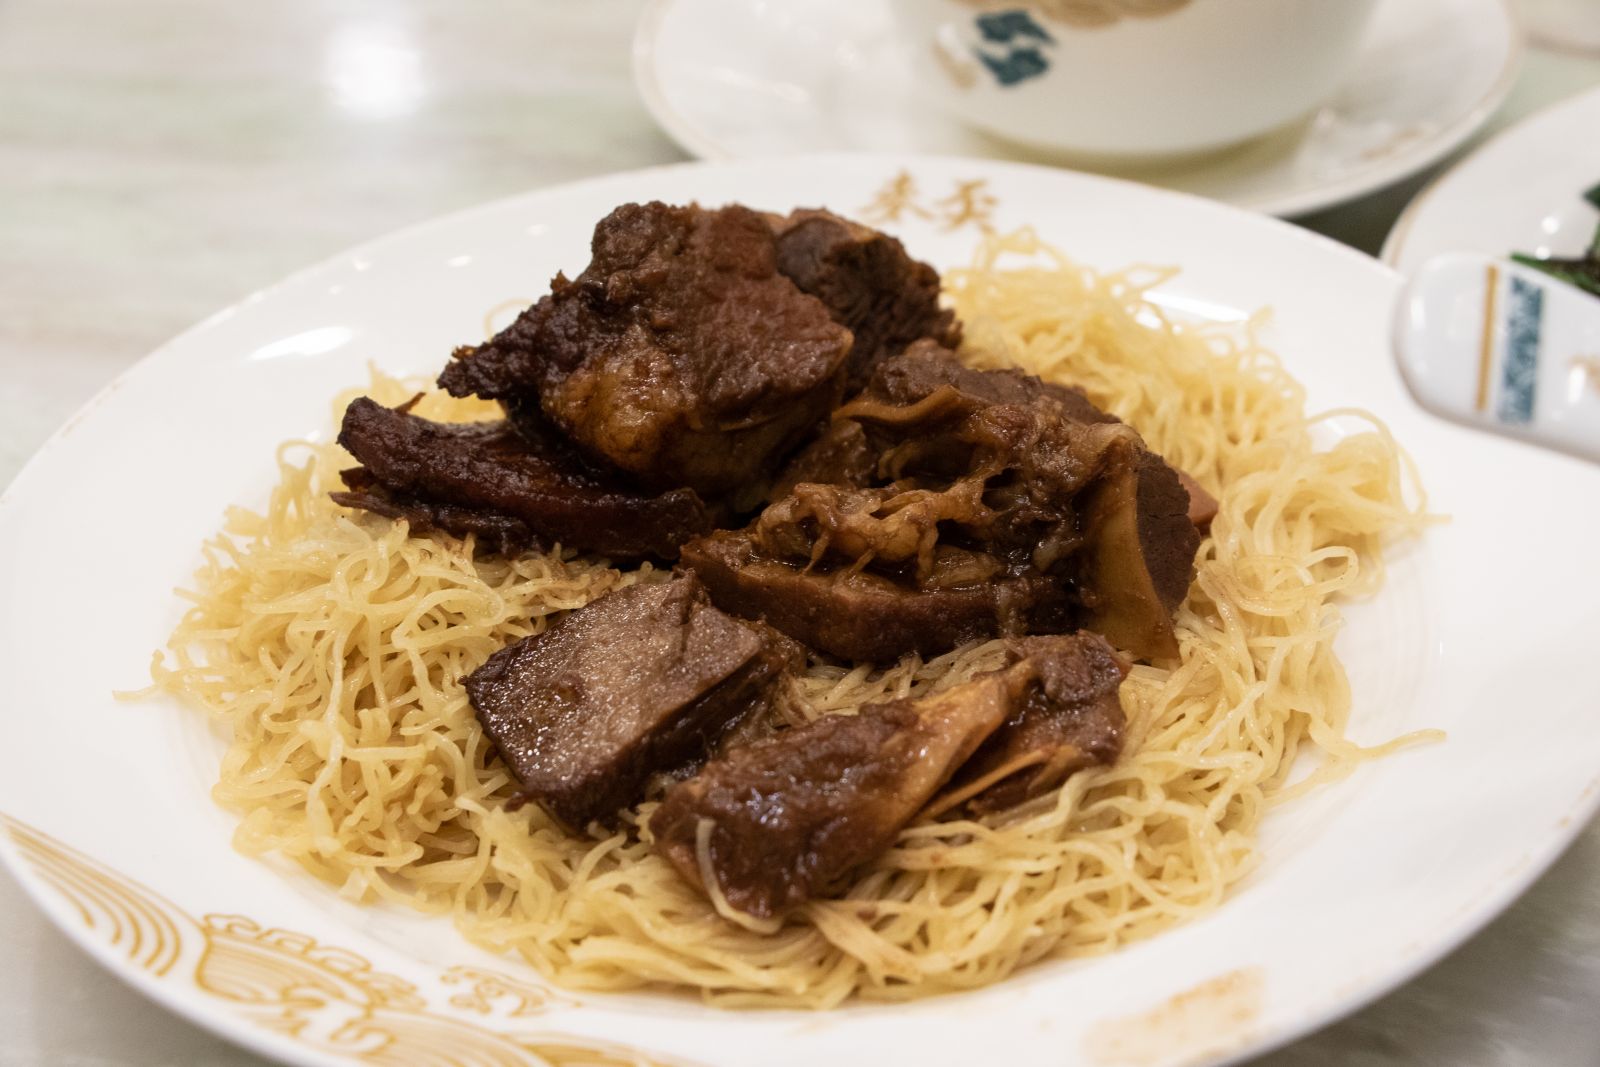 Tossed Noodles with Beef Brisket (牛腩撈麵)